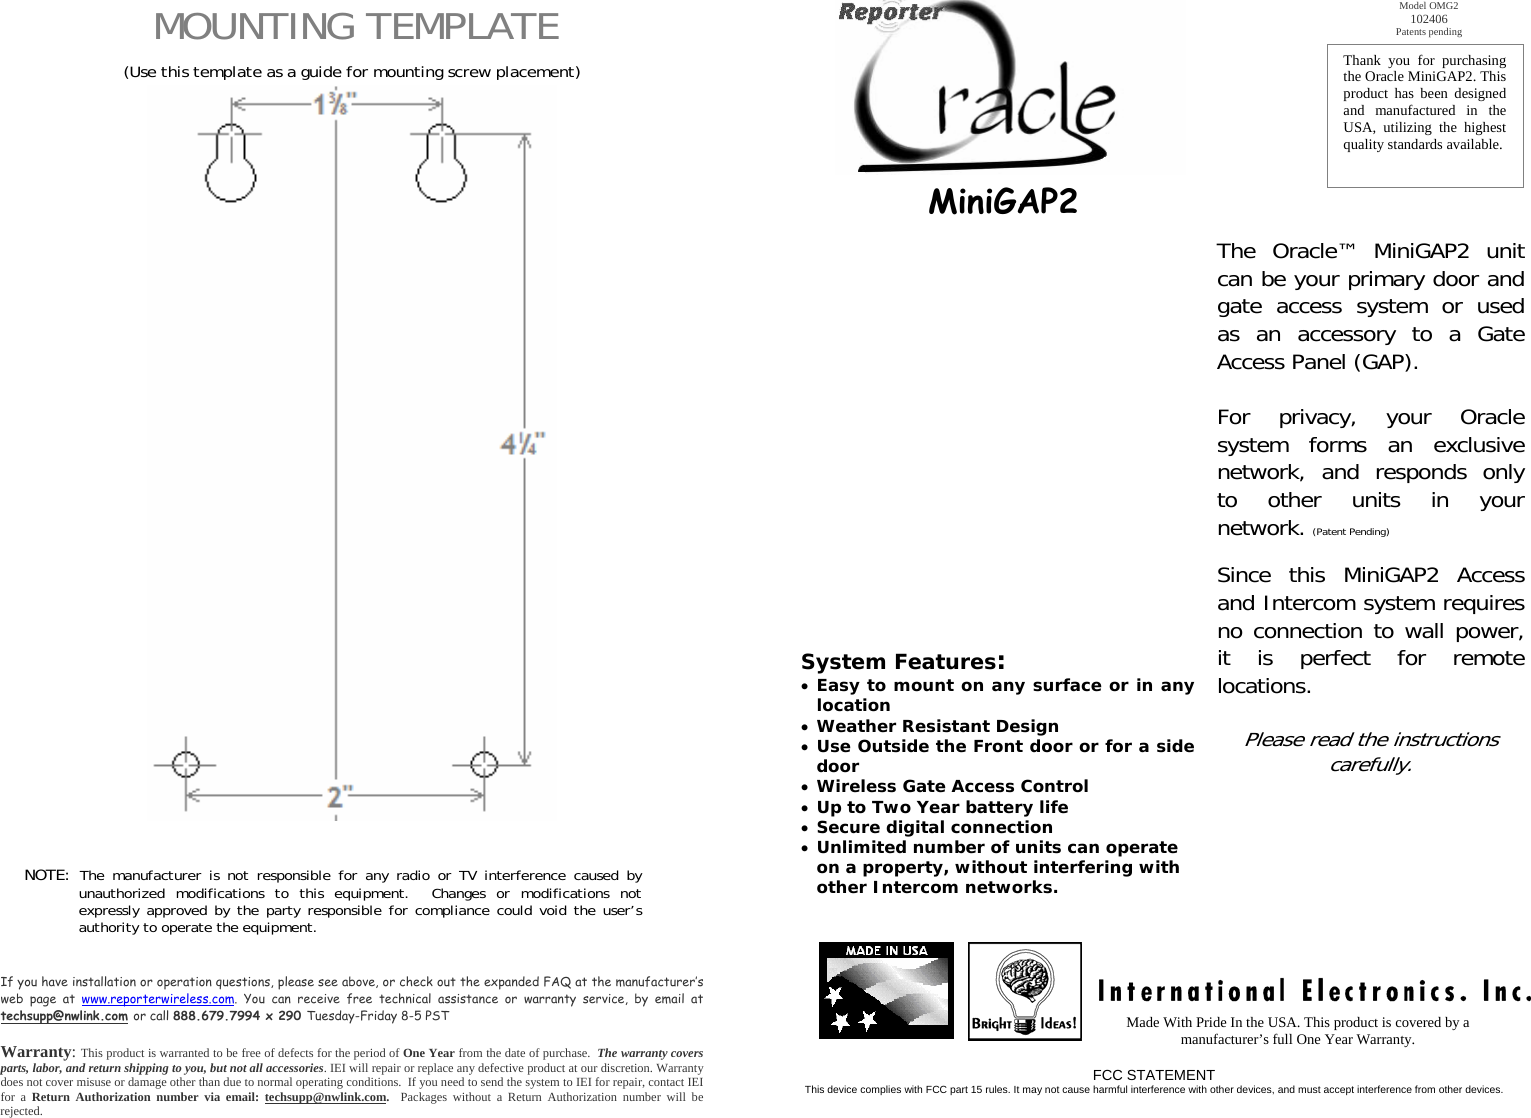   MOUNTING TEMPLATE     (Use this template as a guide for mounting screw placement)                                                          NOTE: The manufacturer is not responsible for any radio or TV interference caused by unauthorized modifications to this equipment.  Changes or modifications not expressly approved by the party responsible for compliance could void the user’s authority to operate the equipment.     If you have installation or operation questions, please see above, or check out the expanded FAQ at the manufacturer’s web page at www.reporterwireless.com. You can receive free technical assistance or warranty service, by email at techsupp@nwlink.com or call 888.679.7994 x 290 Tuesday-Friday 8-5 PST  Warranty: This product is warranted to be free of defects for the period of One Year from the date of purchase.  The warranty covers parts, labor, and return shipping to you, but not all accessories. IEI will repair or replace any defective product at our discretion. Warranty does not cover misuse or damage other than due to normal operating conditions.  If you need to send the system to IEI for repair, contact IEI for a Return Authorization number via email: techsupp@nwlink.com.  Packages without a Return Authorization number will be rejected.       MiniGAP2                 System Features: • Easy to mount on any surface or in anylocation • Weather Resistant Design • Use Outside the Front door or for a sidedoor • Wireless Gate Access Control • Up to Two Year battery life • Secure digital connection • Unlimited number of units can operate on a property, without interfering with other Intercom networks. Thank you for purchasing the Oracle MiniGAP2. This product has been designed and manufactured in the USA, utilizing the highest quality standards available.  Model OMG2 102406 Patents pending The Oracle™ MiniGAP2 unit can be your primary door and gate access system or used as an accessory to a Gate Access Panel (GAP).  For privacy, your Oracle system forms an exclusive network, and responds only to other units in your network. (Patent Pending)  Since this MiniGAP2 Access and Intercom system requires no connection to wall power, it is perfect for remote locations.    Please read the instructions carefully. Made With Pride In the USA. This product is covered by a manufacturer’s full One Year Warranty. FCC STATEMENT This device complies with FCC part 15 rules. It may not cause harmful interference with other devices, and must accept interference from other devices.  